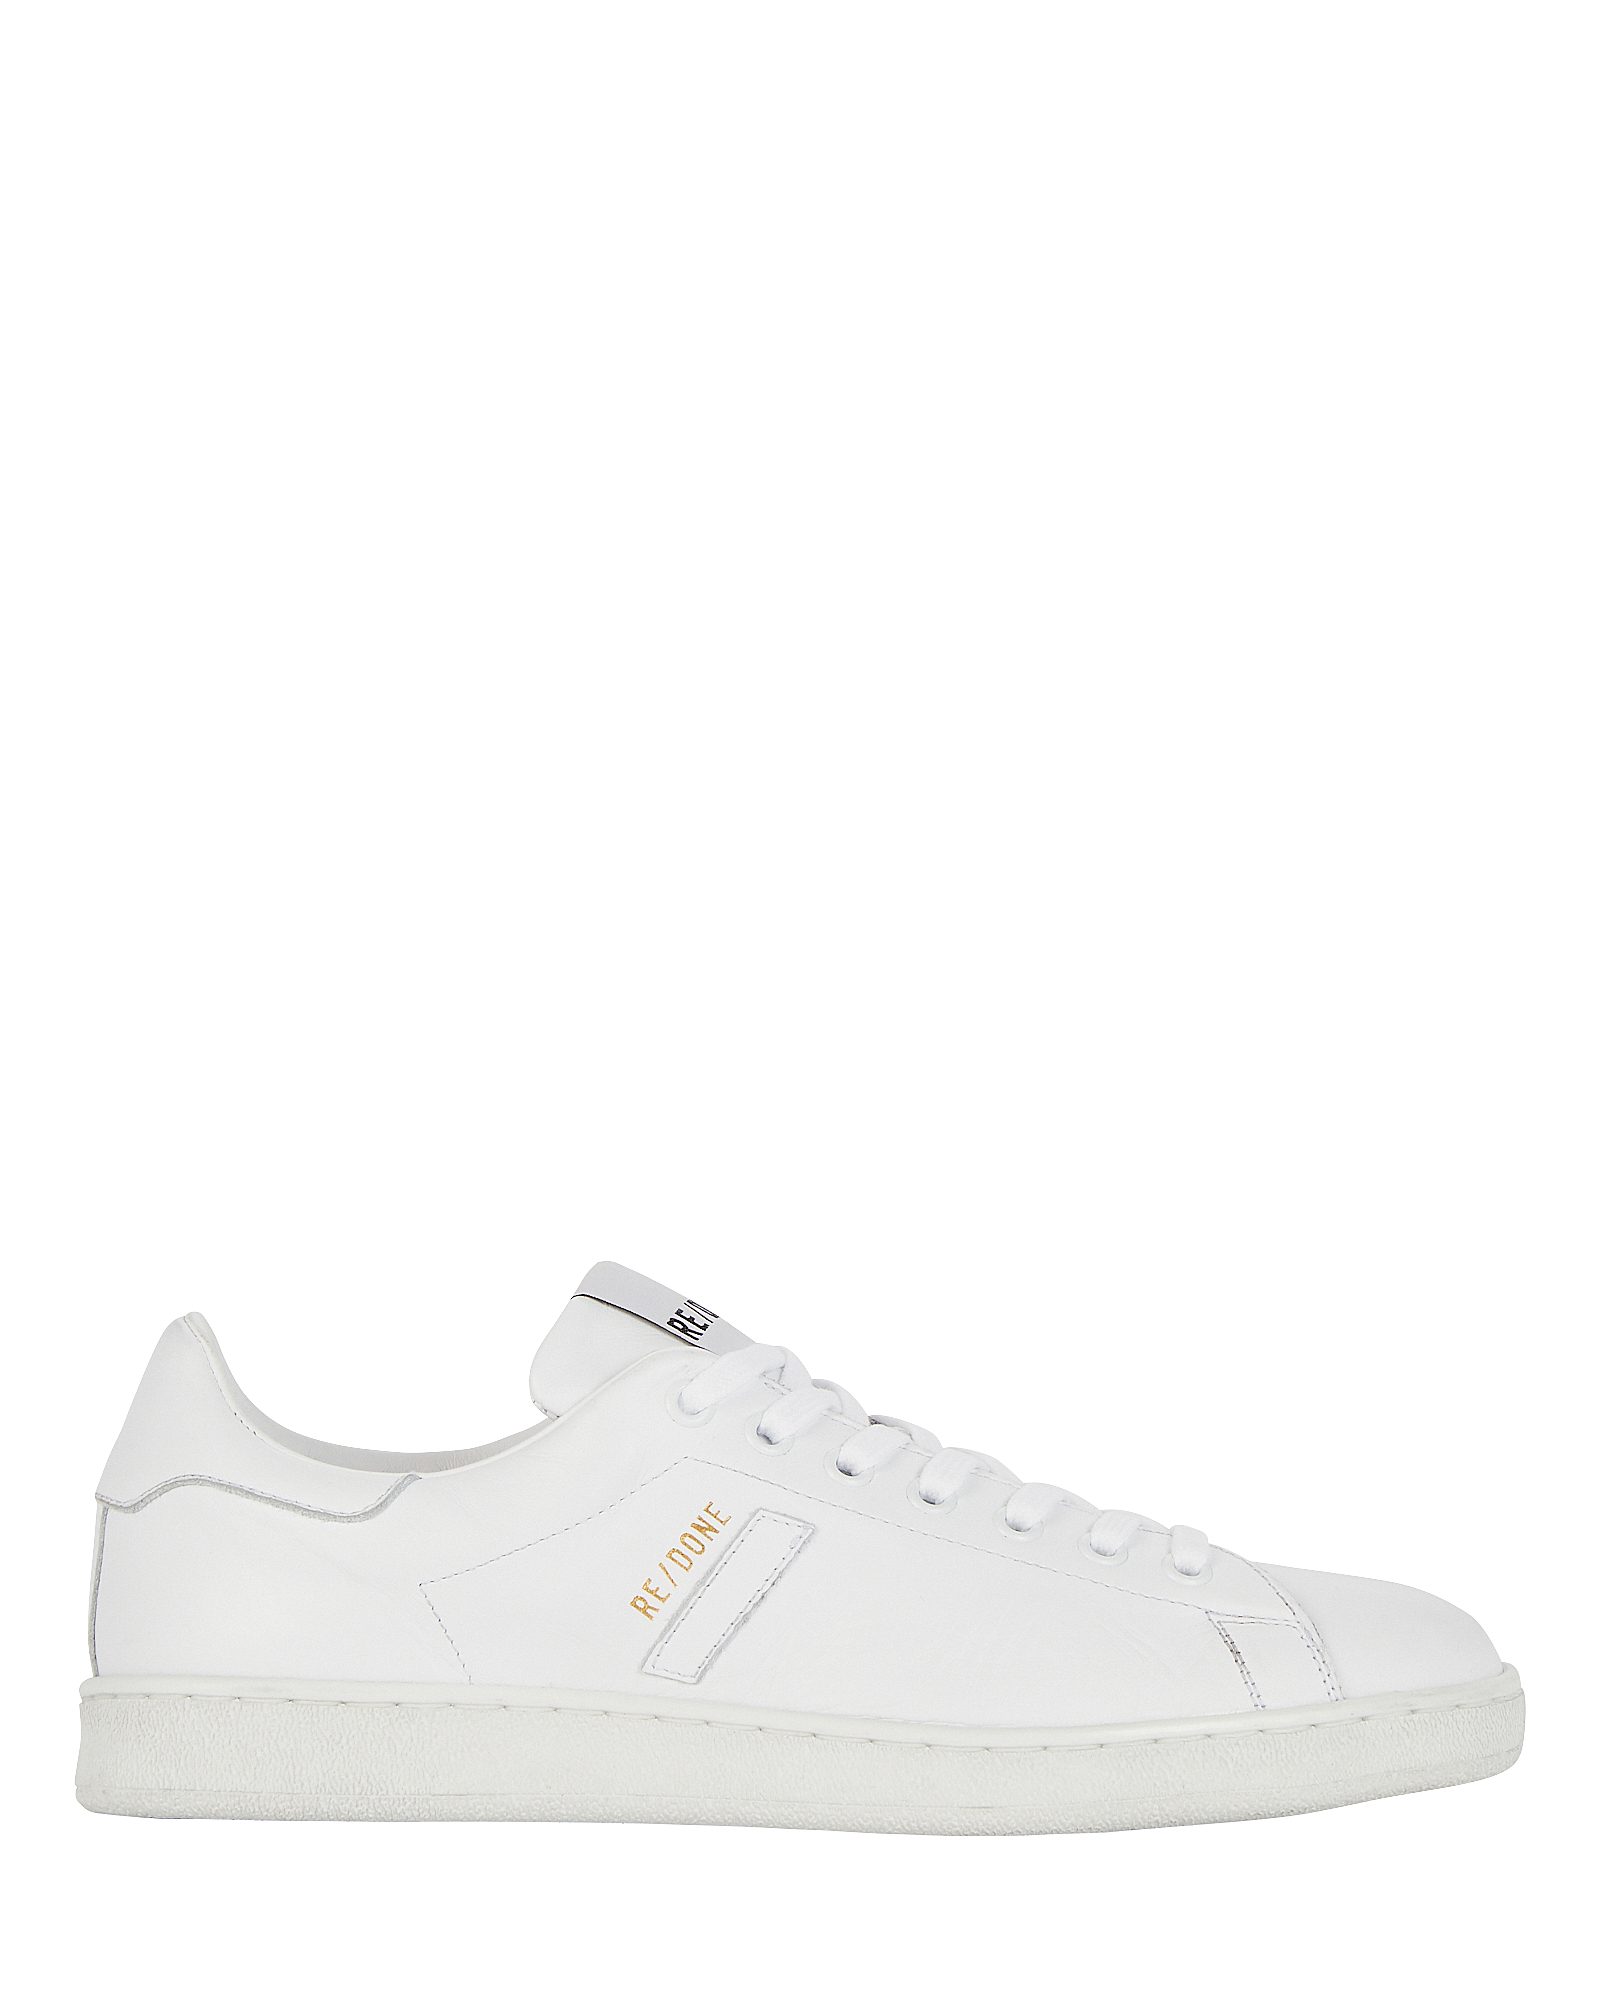 RE/DONE 70s Leather Tennis Sneakers | INTERMIX®